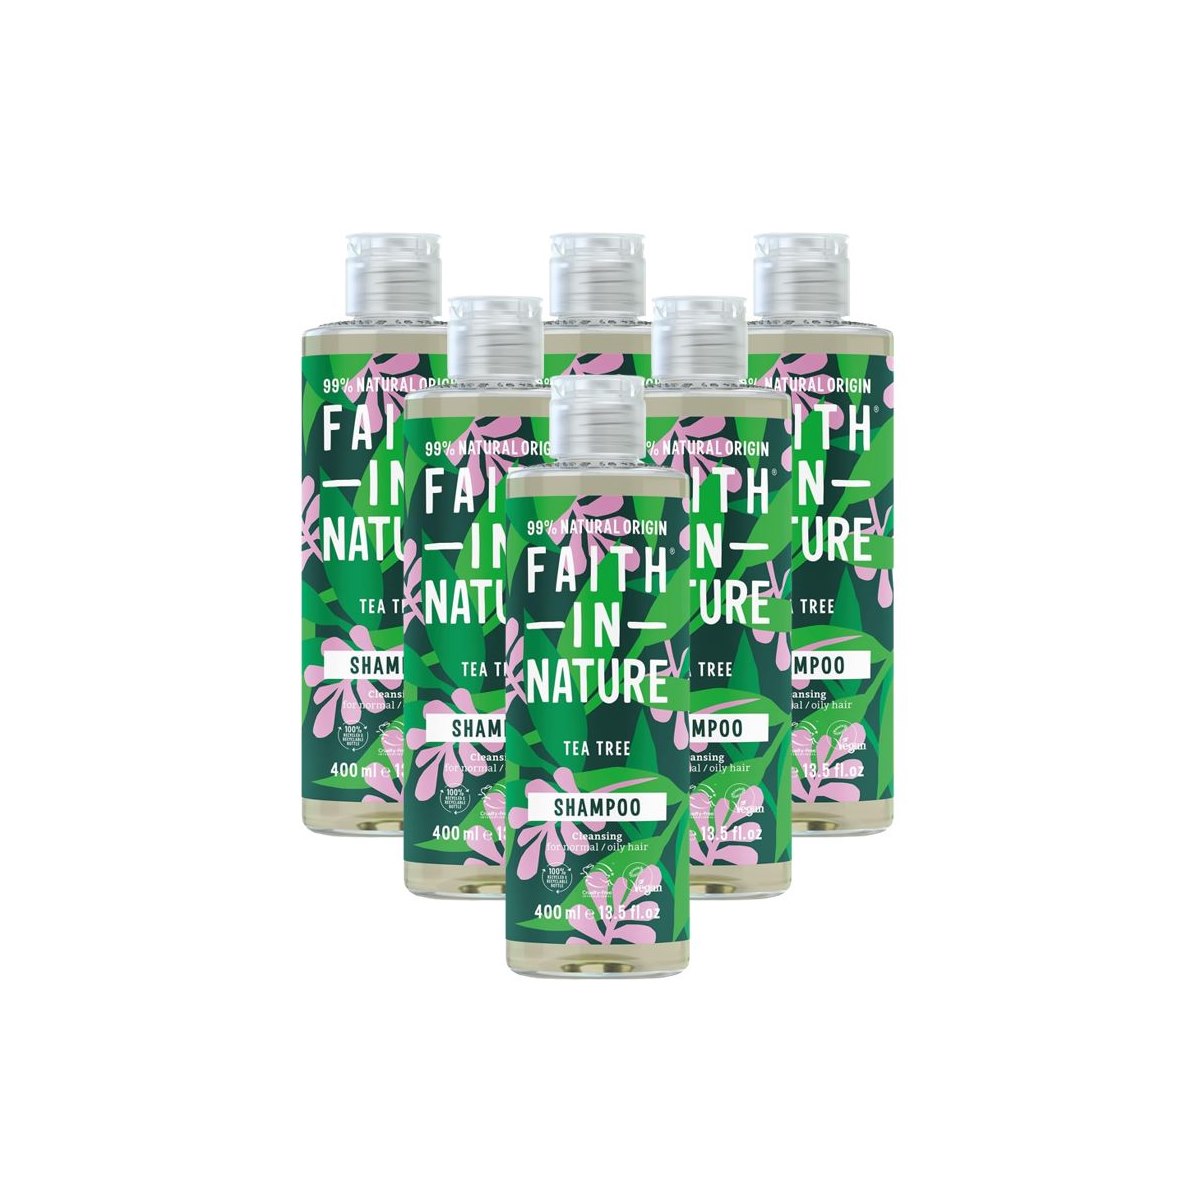 Case of 6 x Faith in Nature Cleansing Shampoo - Tea Tree 400ml